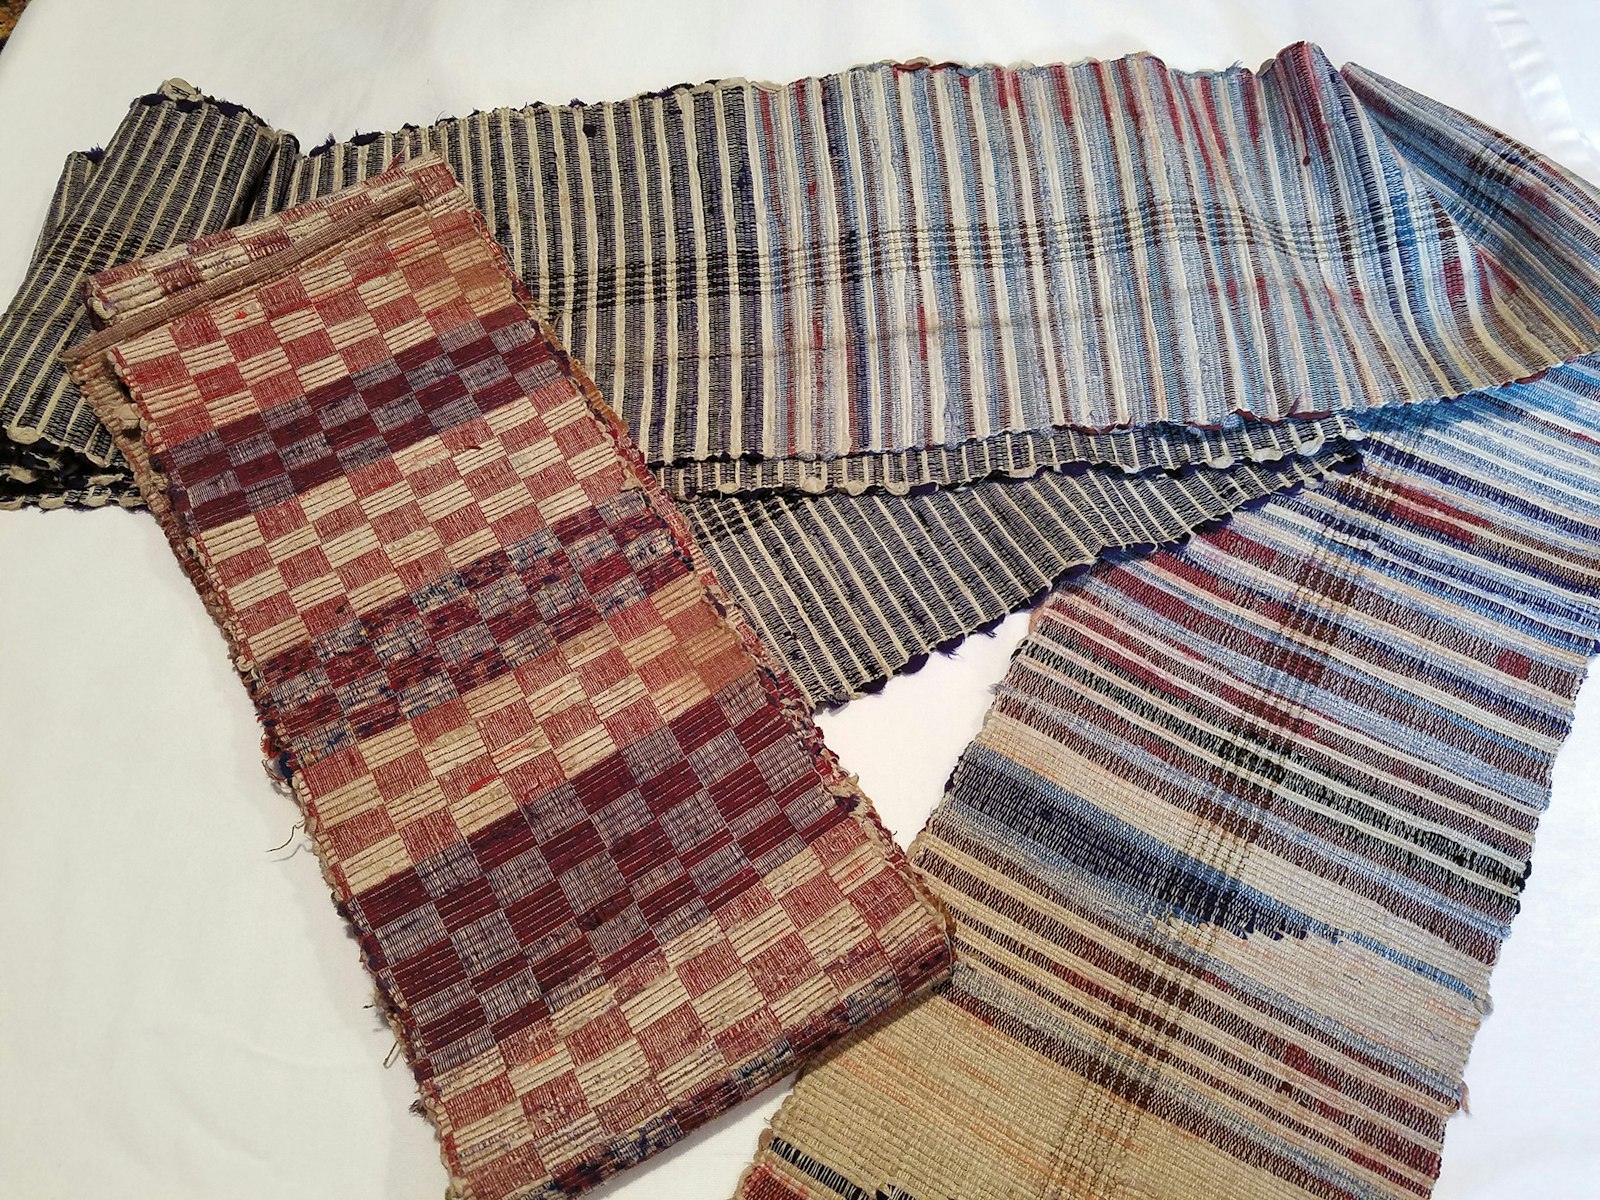 Notes from the Fell: Rag Weaving--For the Love of Rags | Handwoven